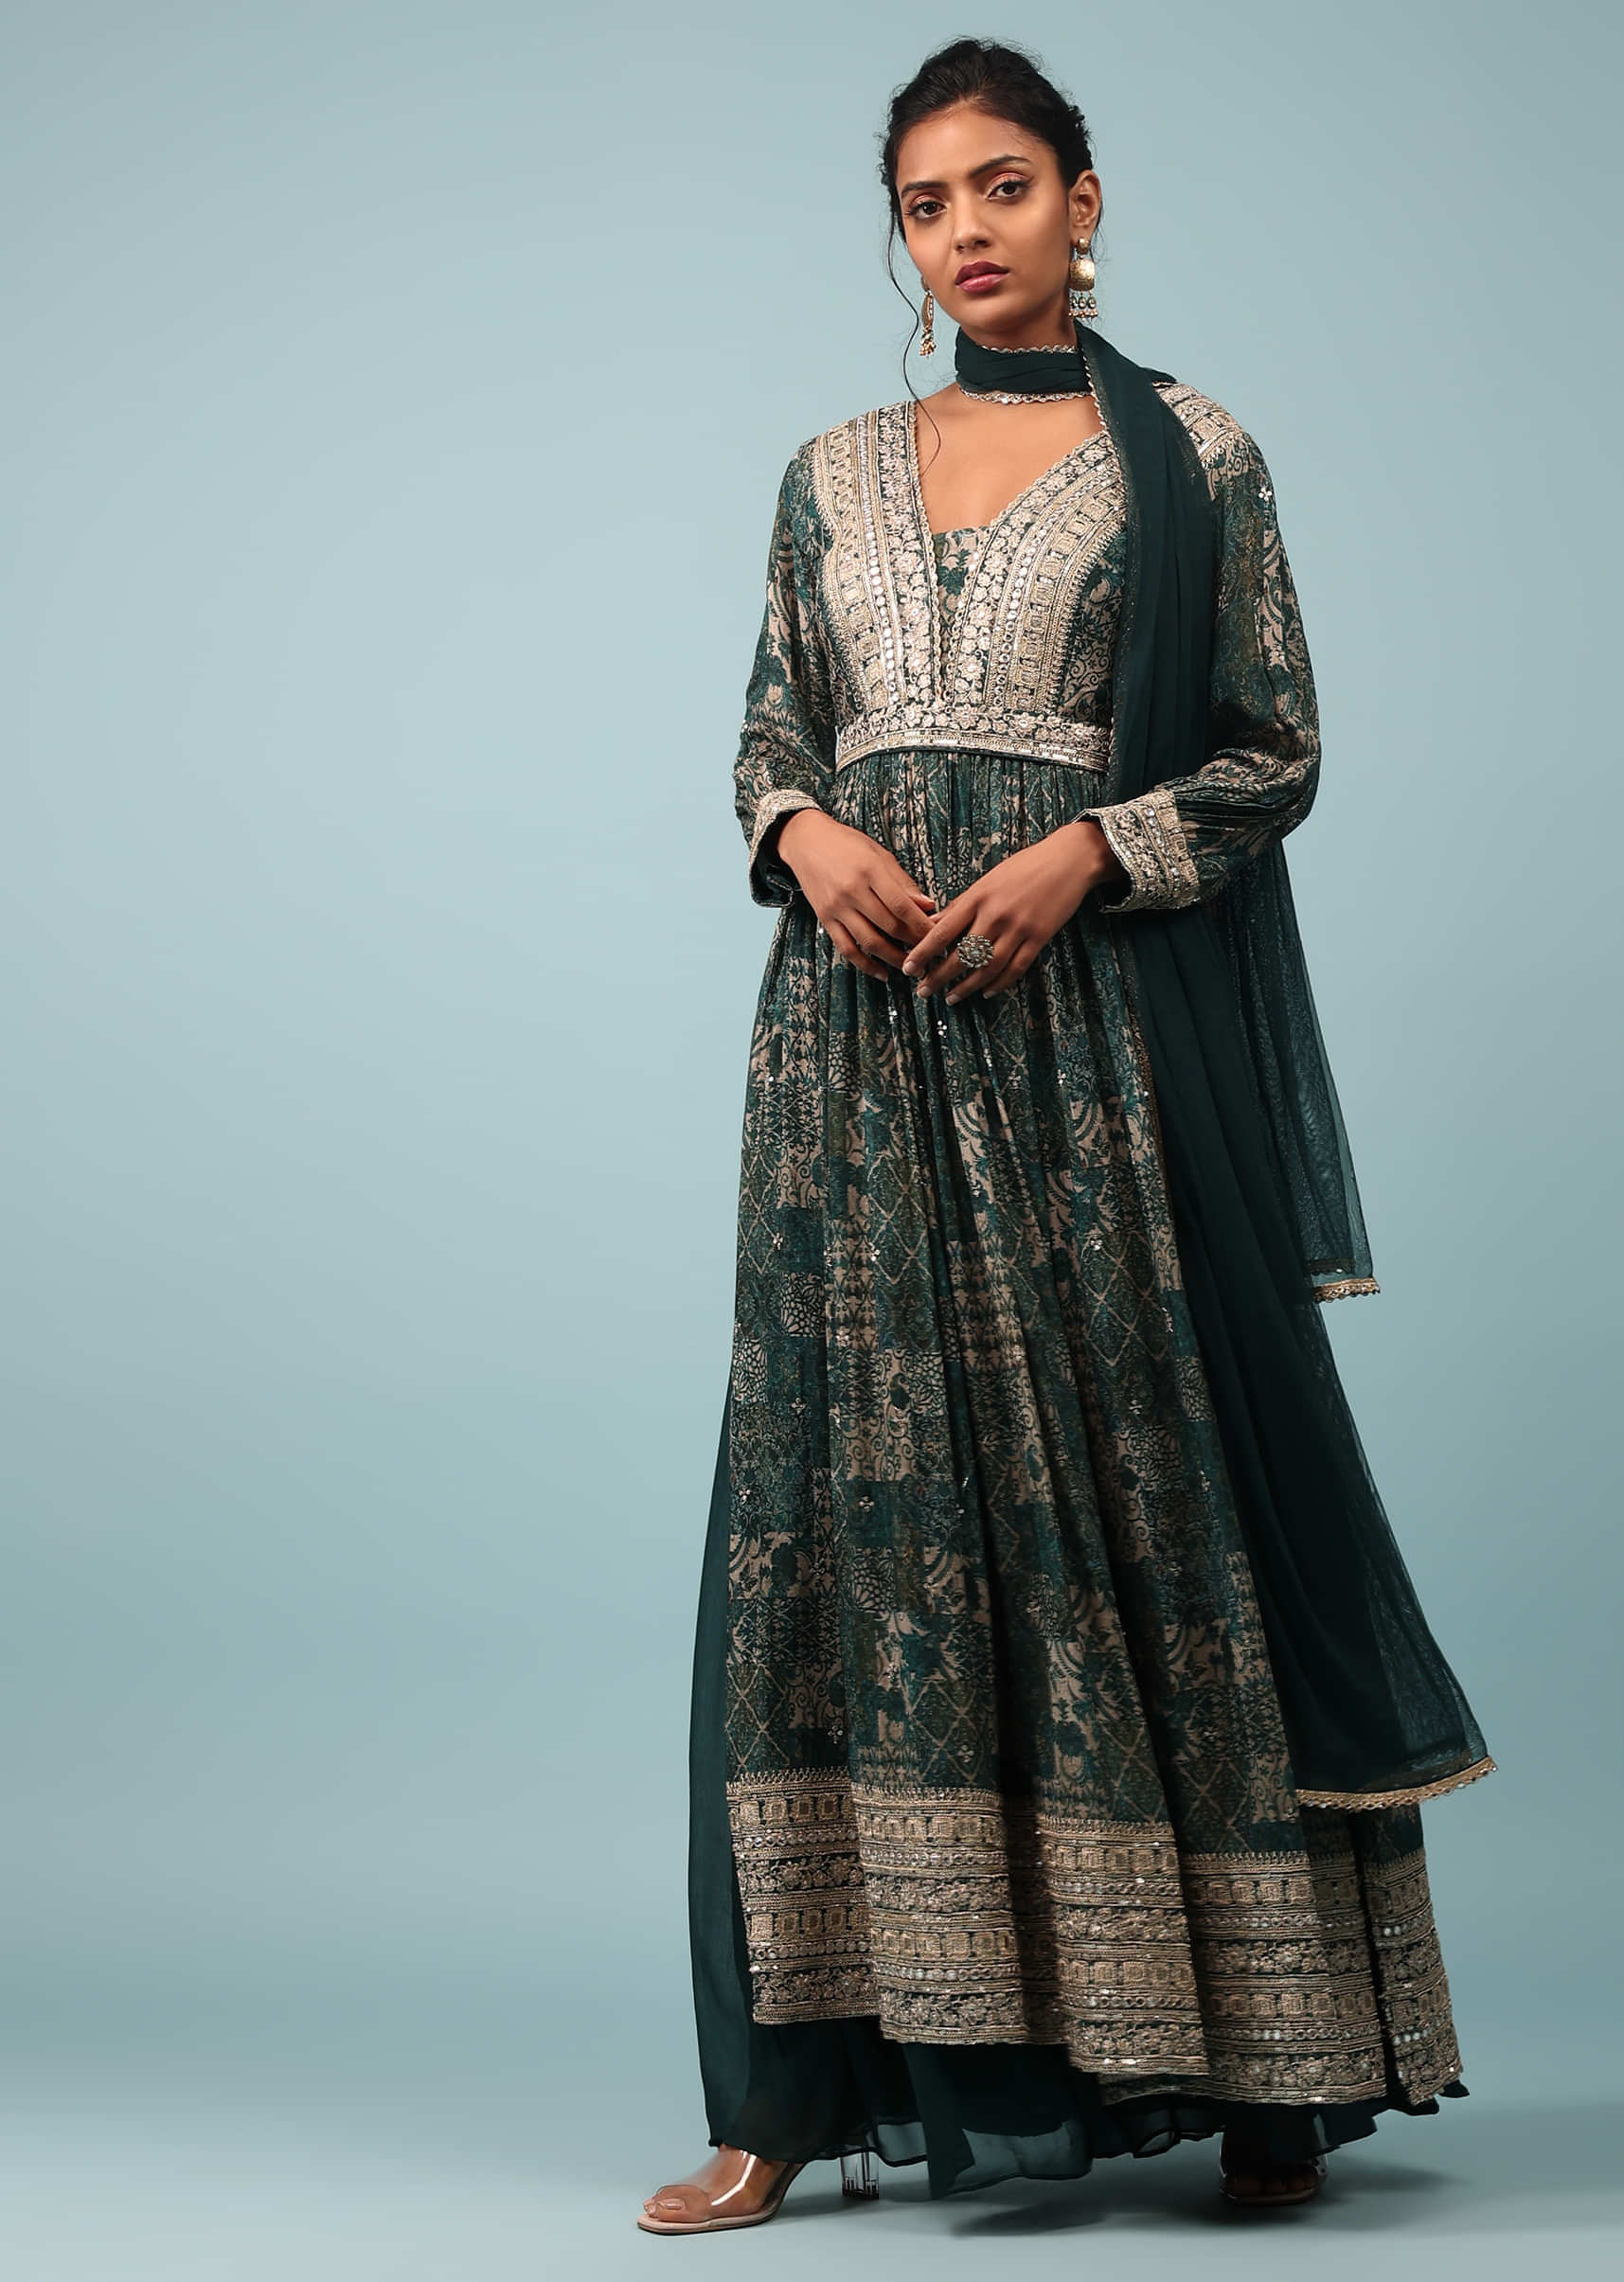 June Bug Green Chinon Palazzo Suit With Embroidery